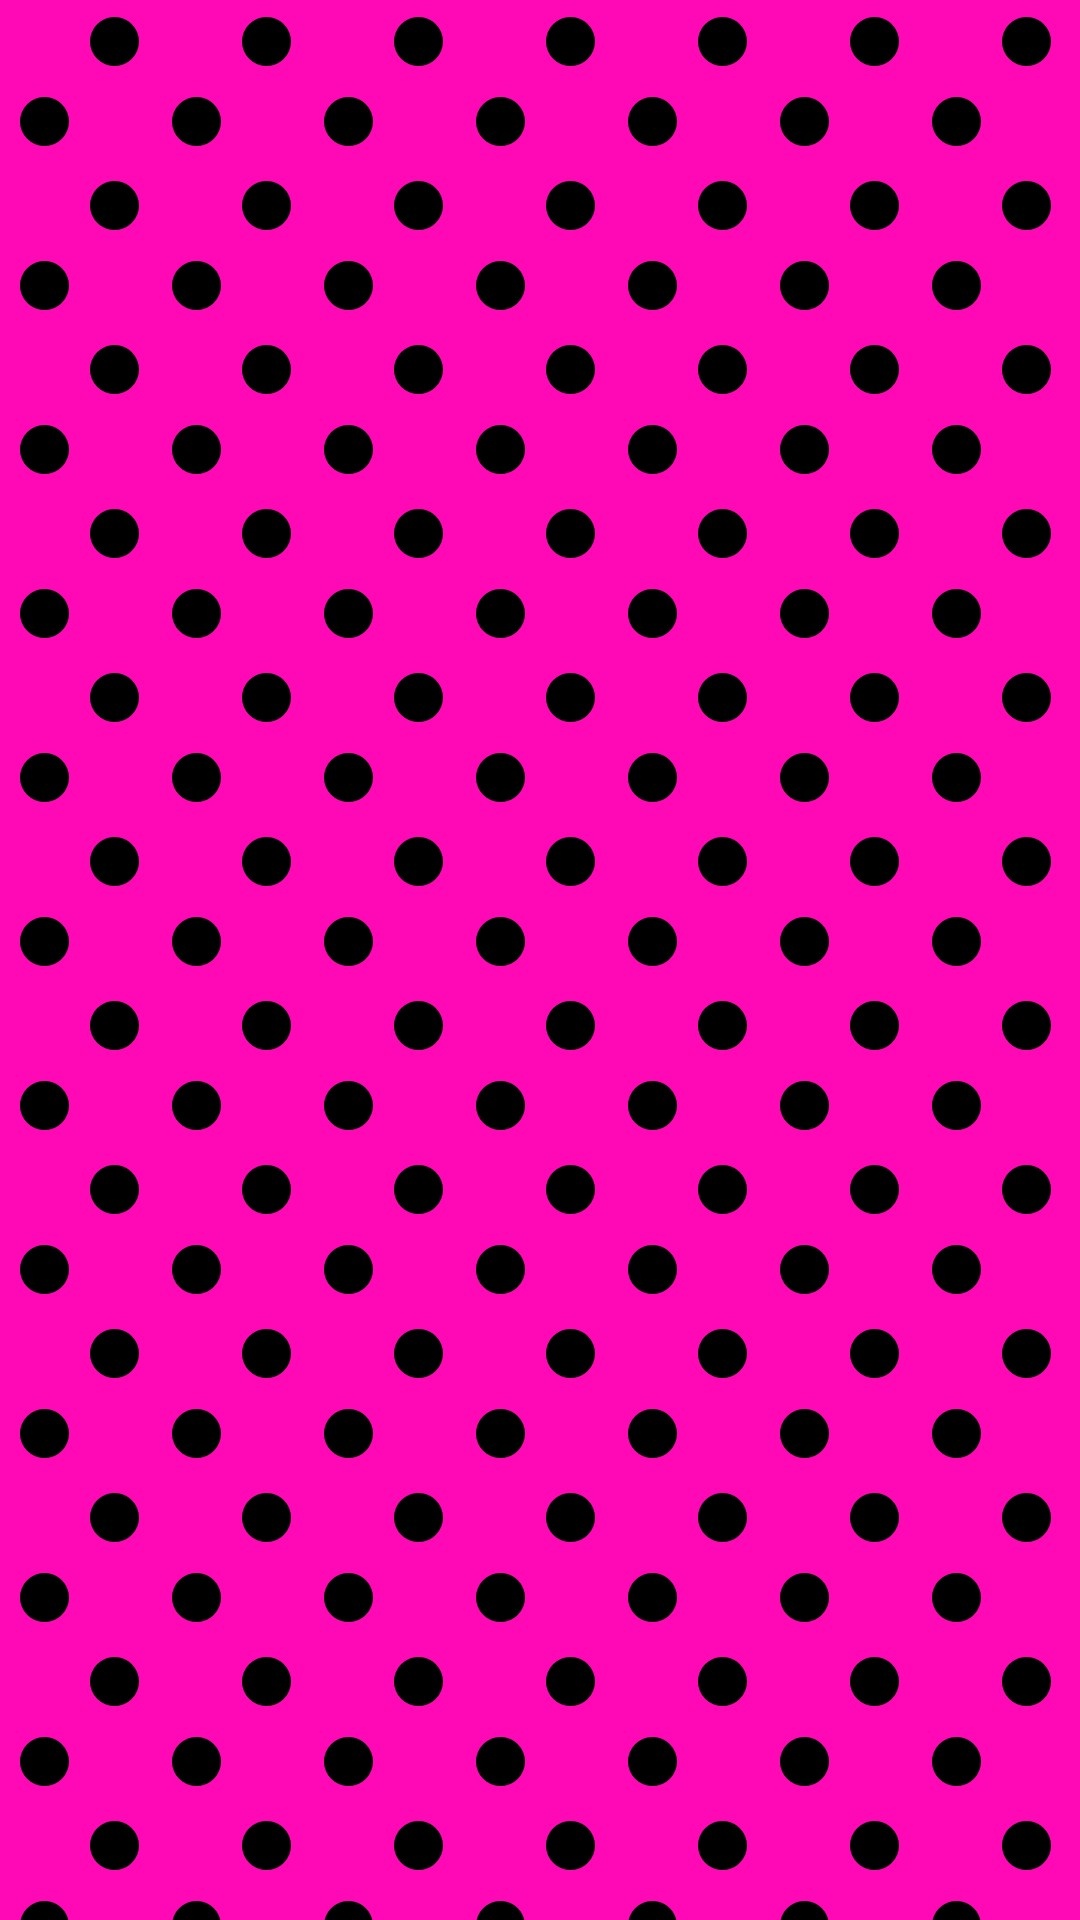 3D iPhone wallpaper, Pink Polka Dot, Playful and dynamic, Personalized style, 1080x1920 Full HD Phone